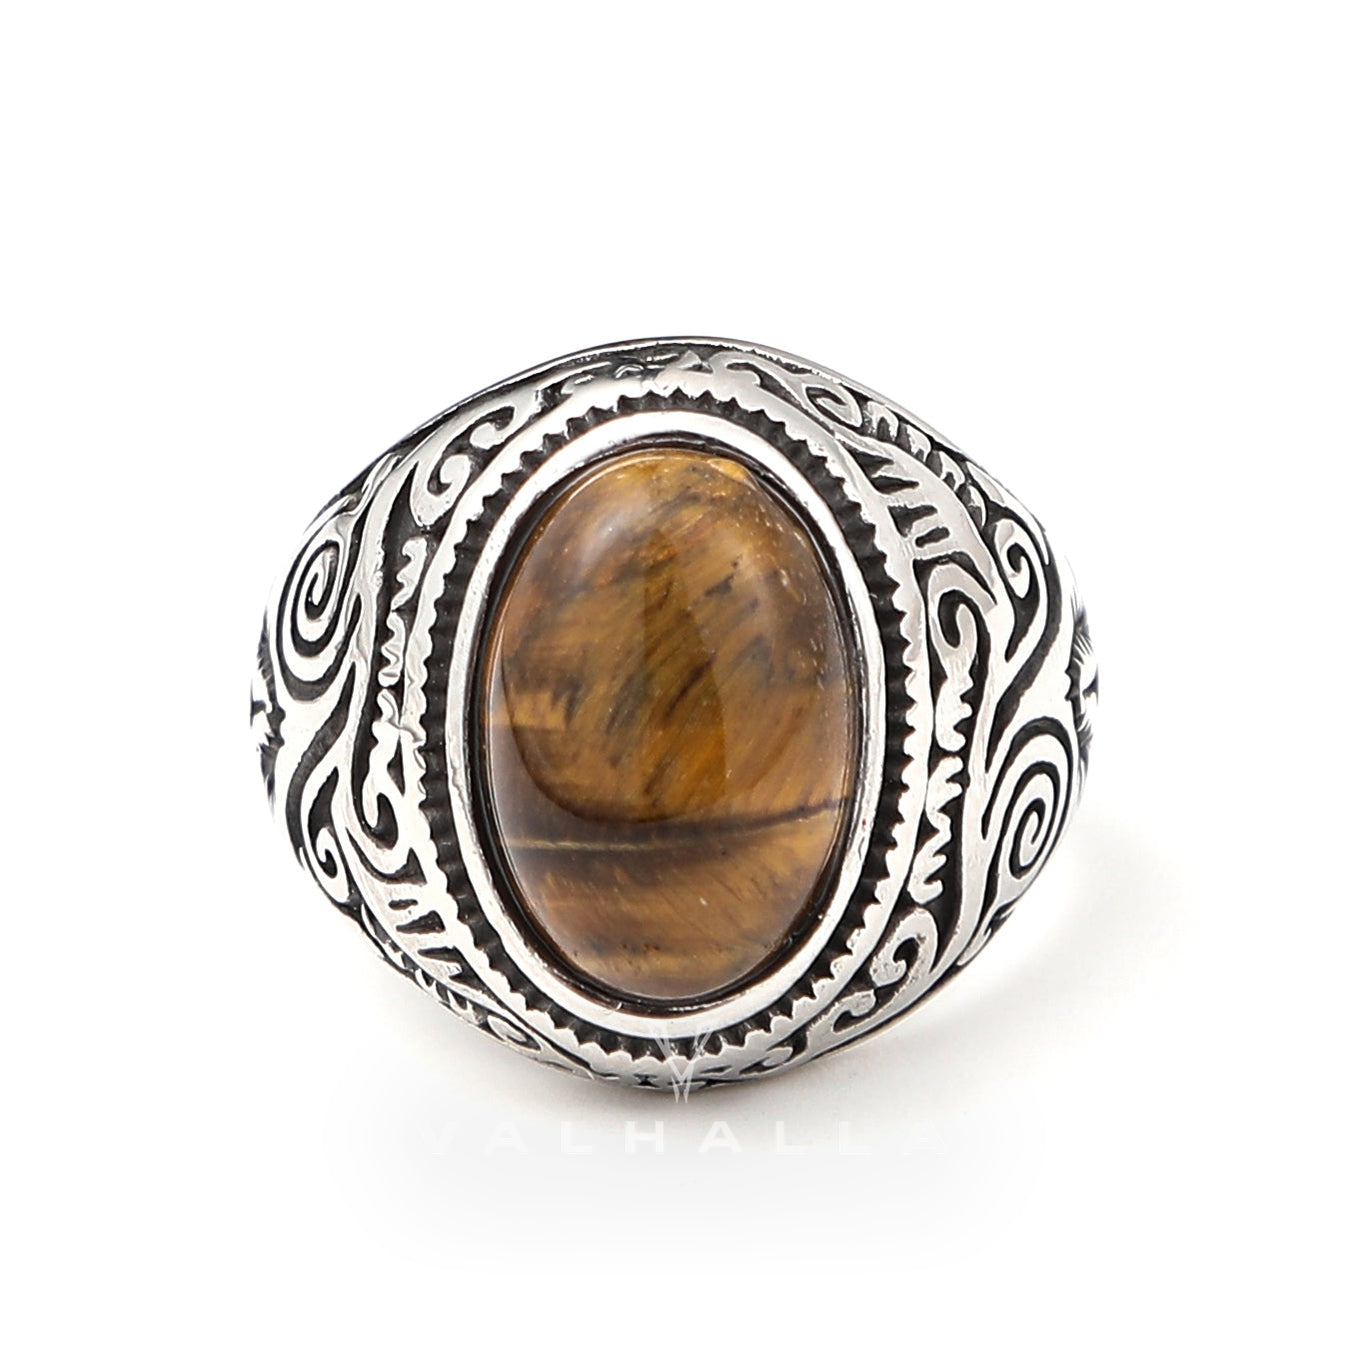 Handcrafted Stainless Steel Celtic Scroll Ring With Inset Stone